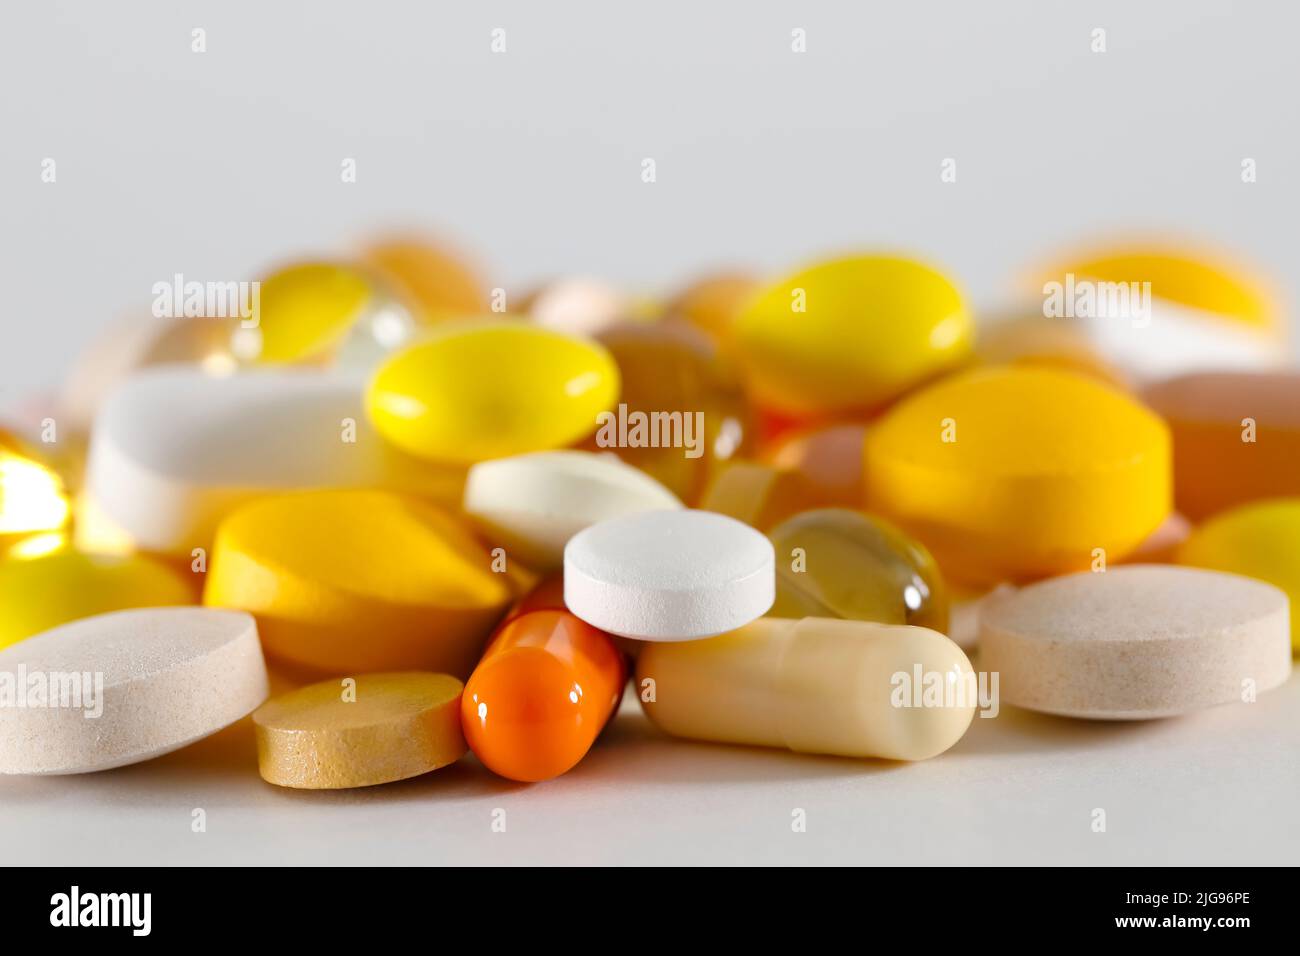 Here is a large dosage of medicines. These varied tablets have various shapes and various colors. Stock Photo